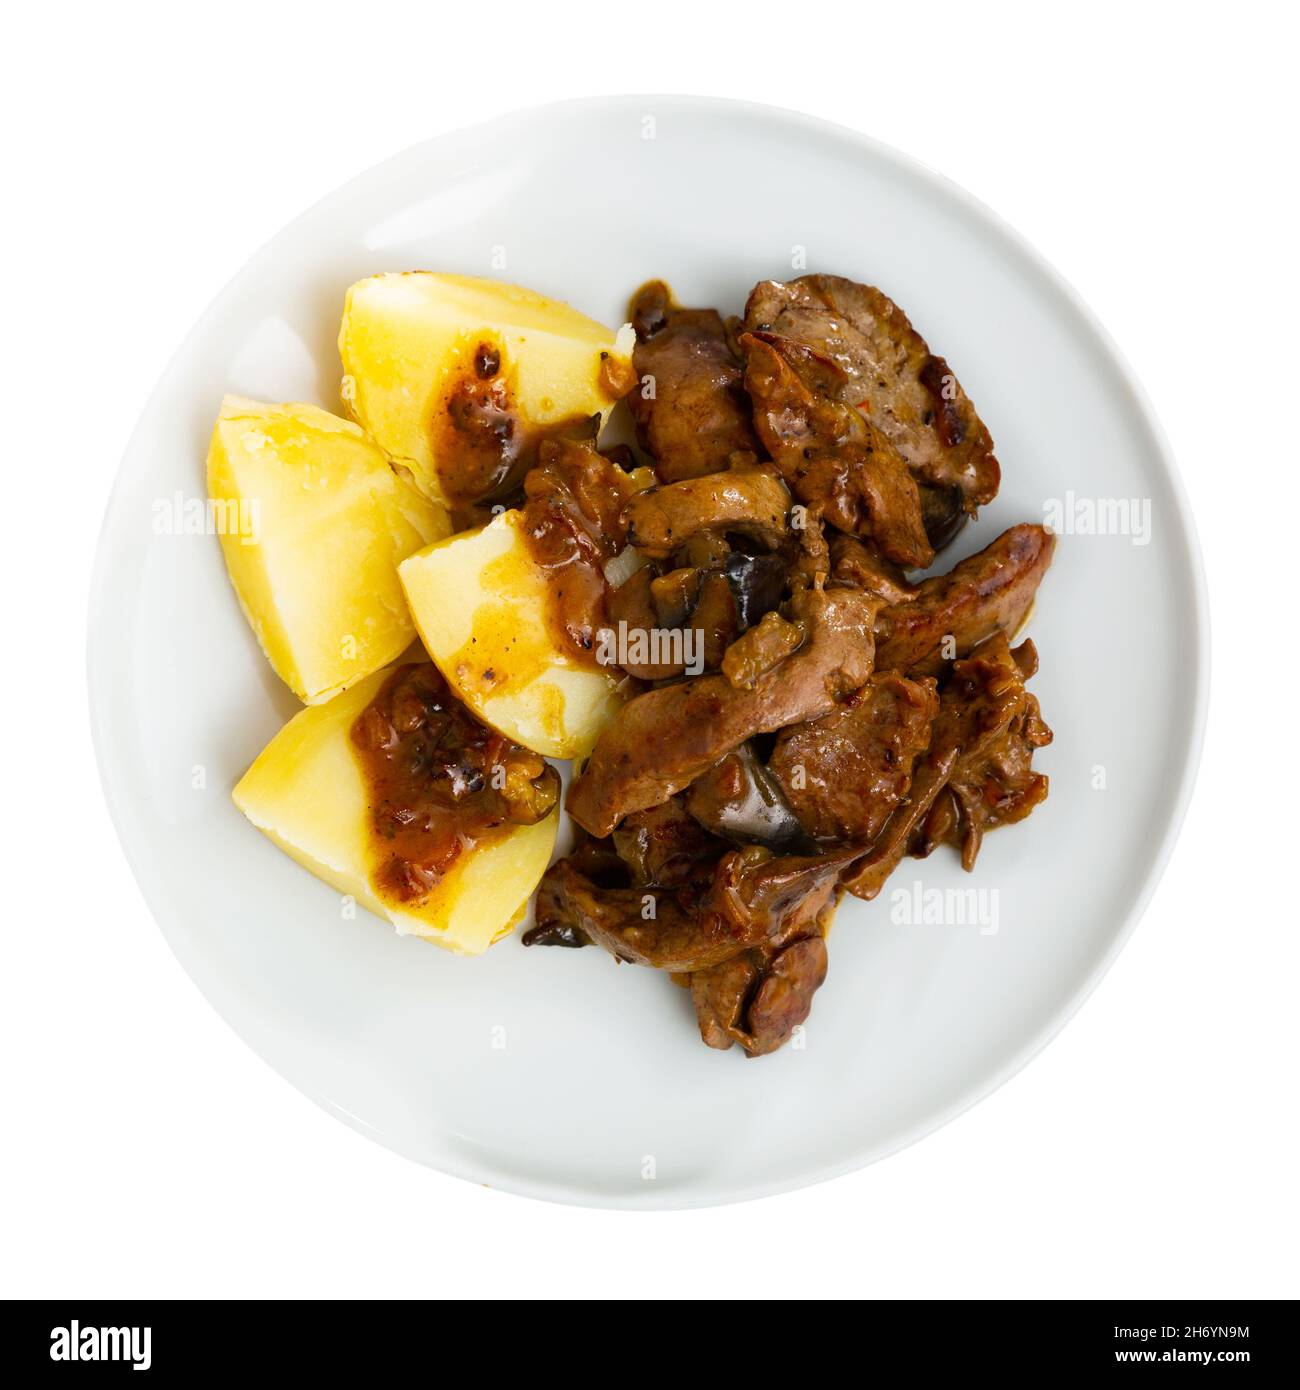 Fried rabbit liver served with boiled potato Stock Photo